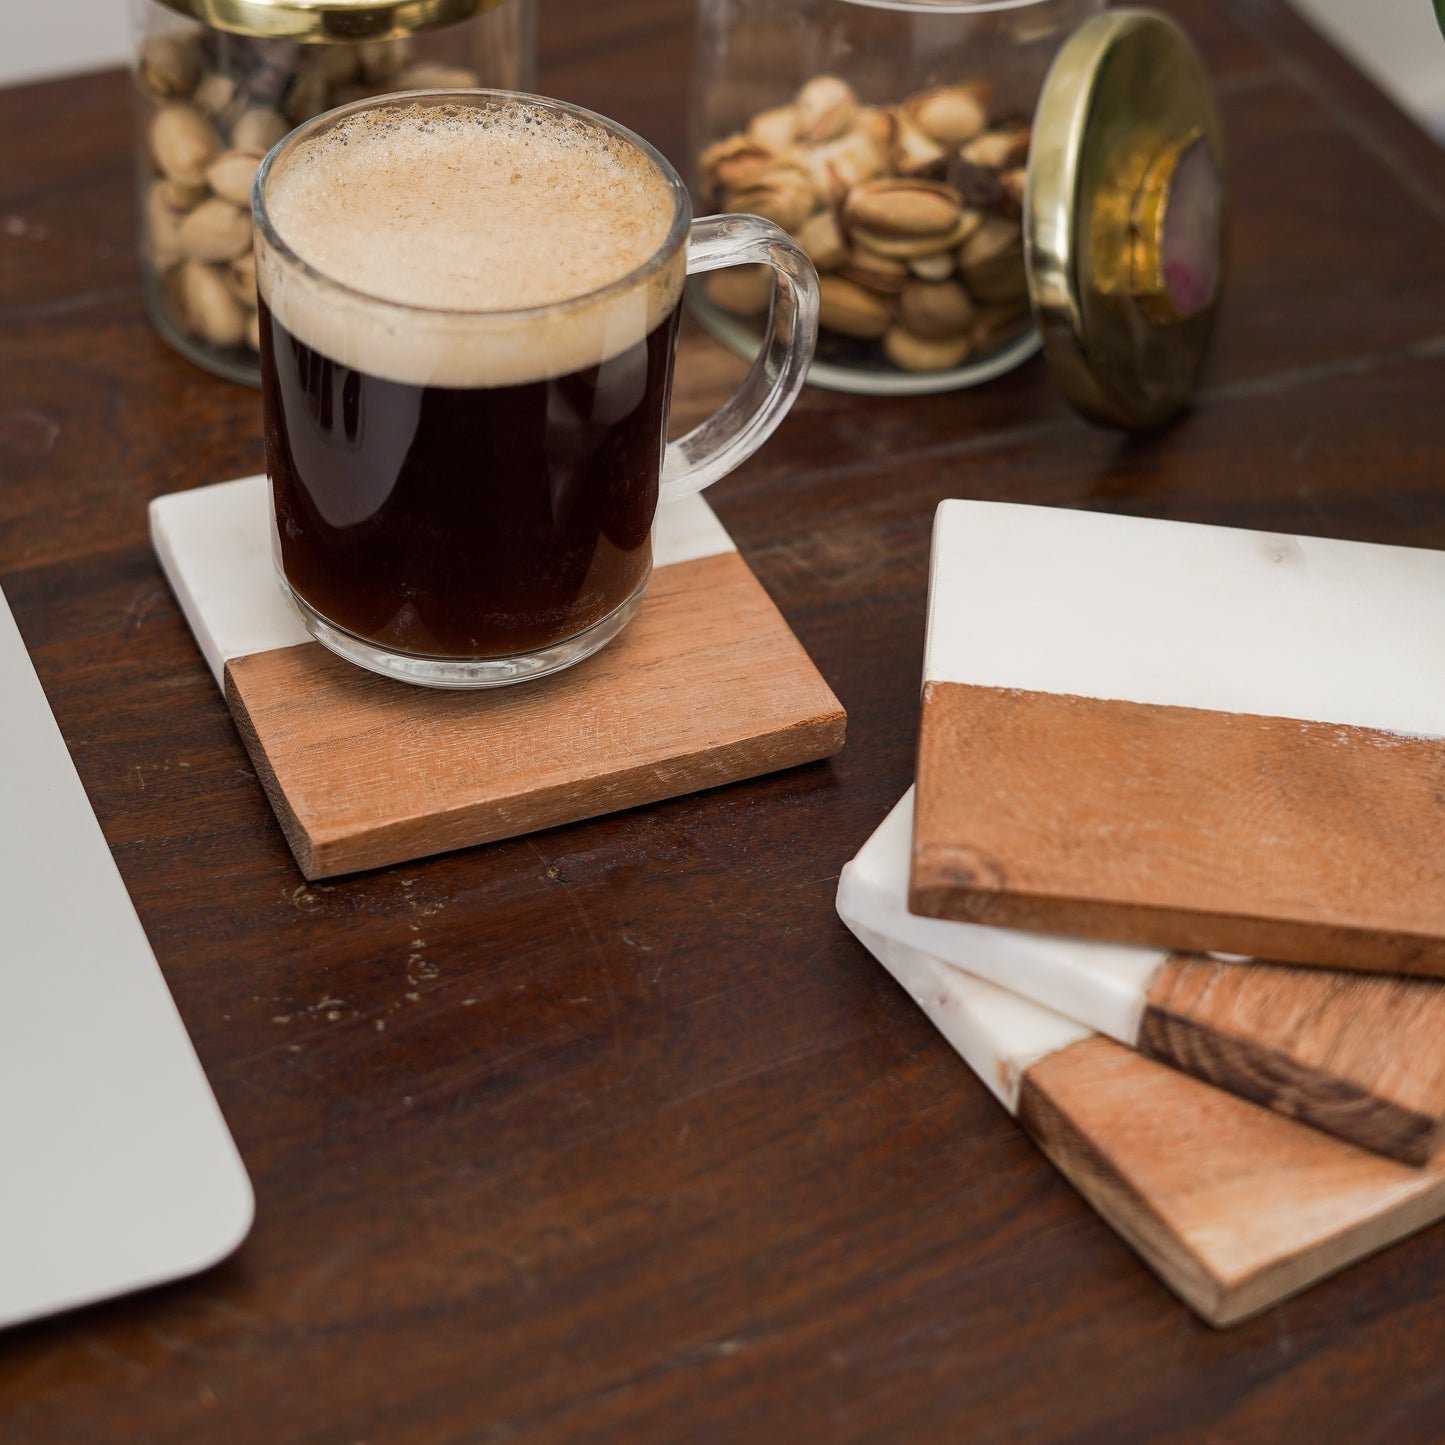 Marble and Wood Coaster Set of 4 for Tea Coffee Cocktail Handmade Marble Coaster for Hot & Cold Drinks Coaster for Dining Table Home and Office Square- White